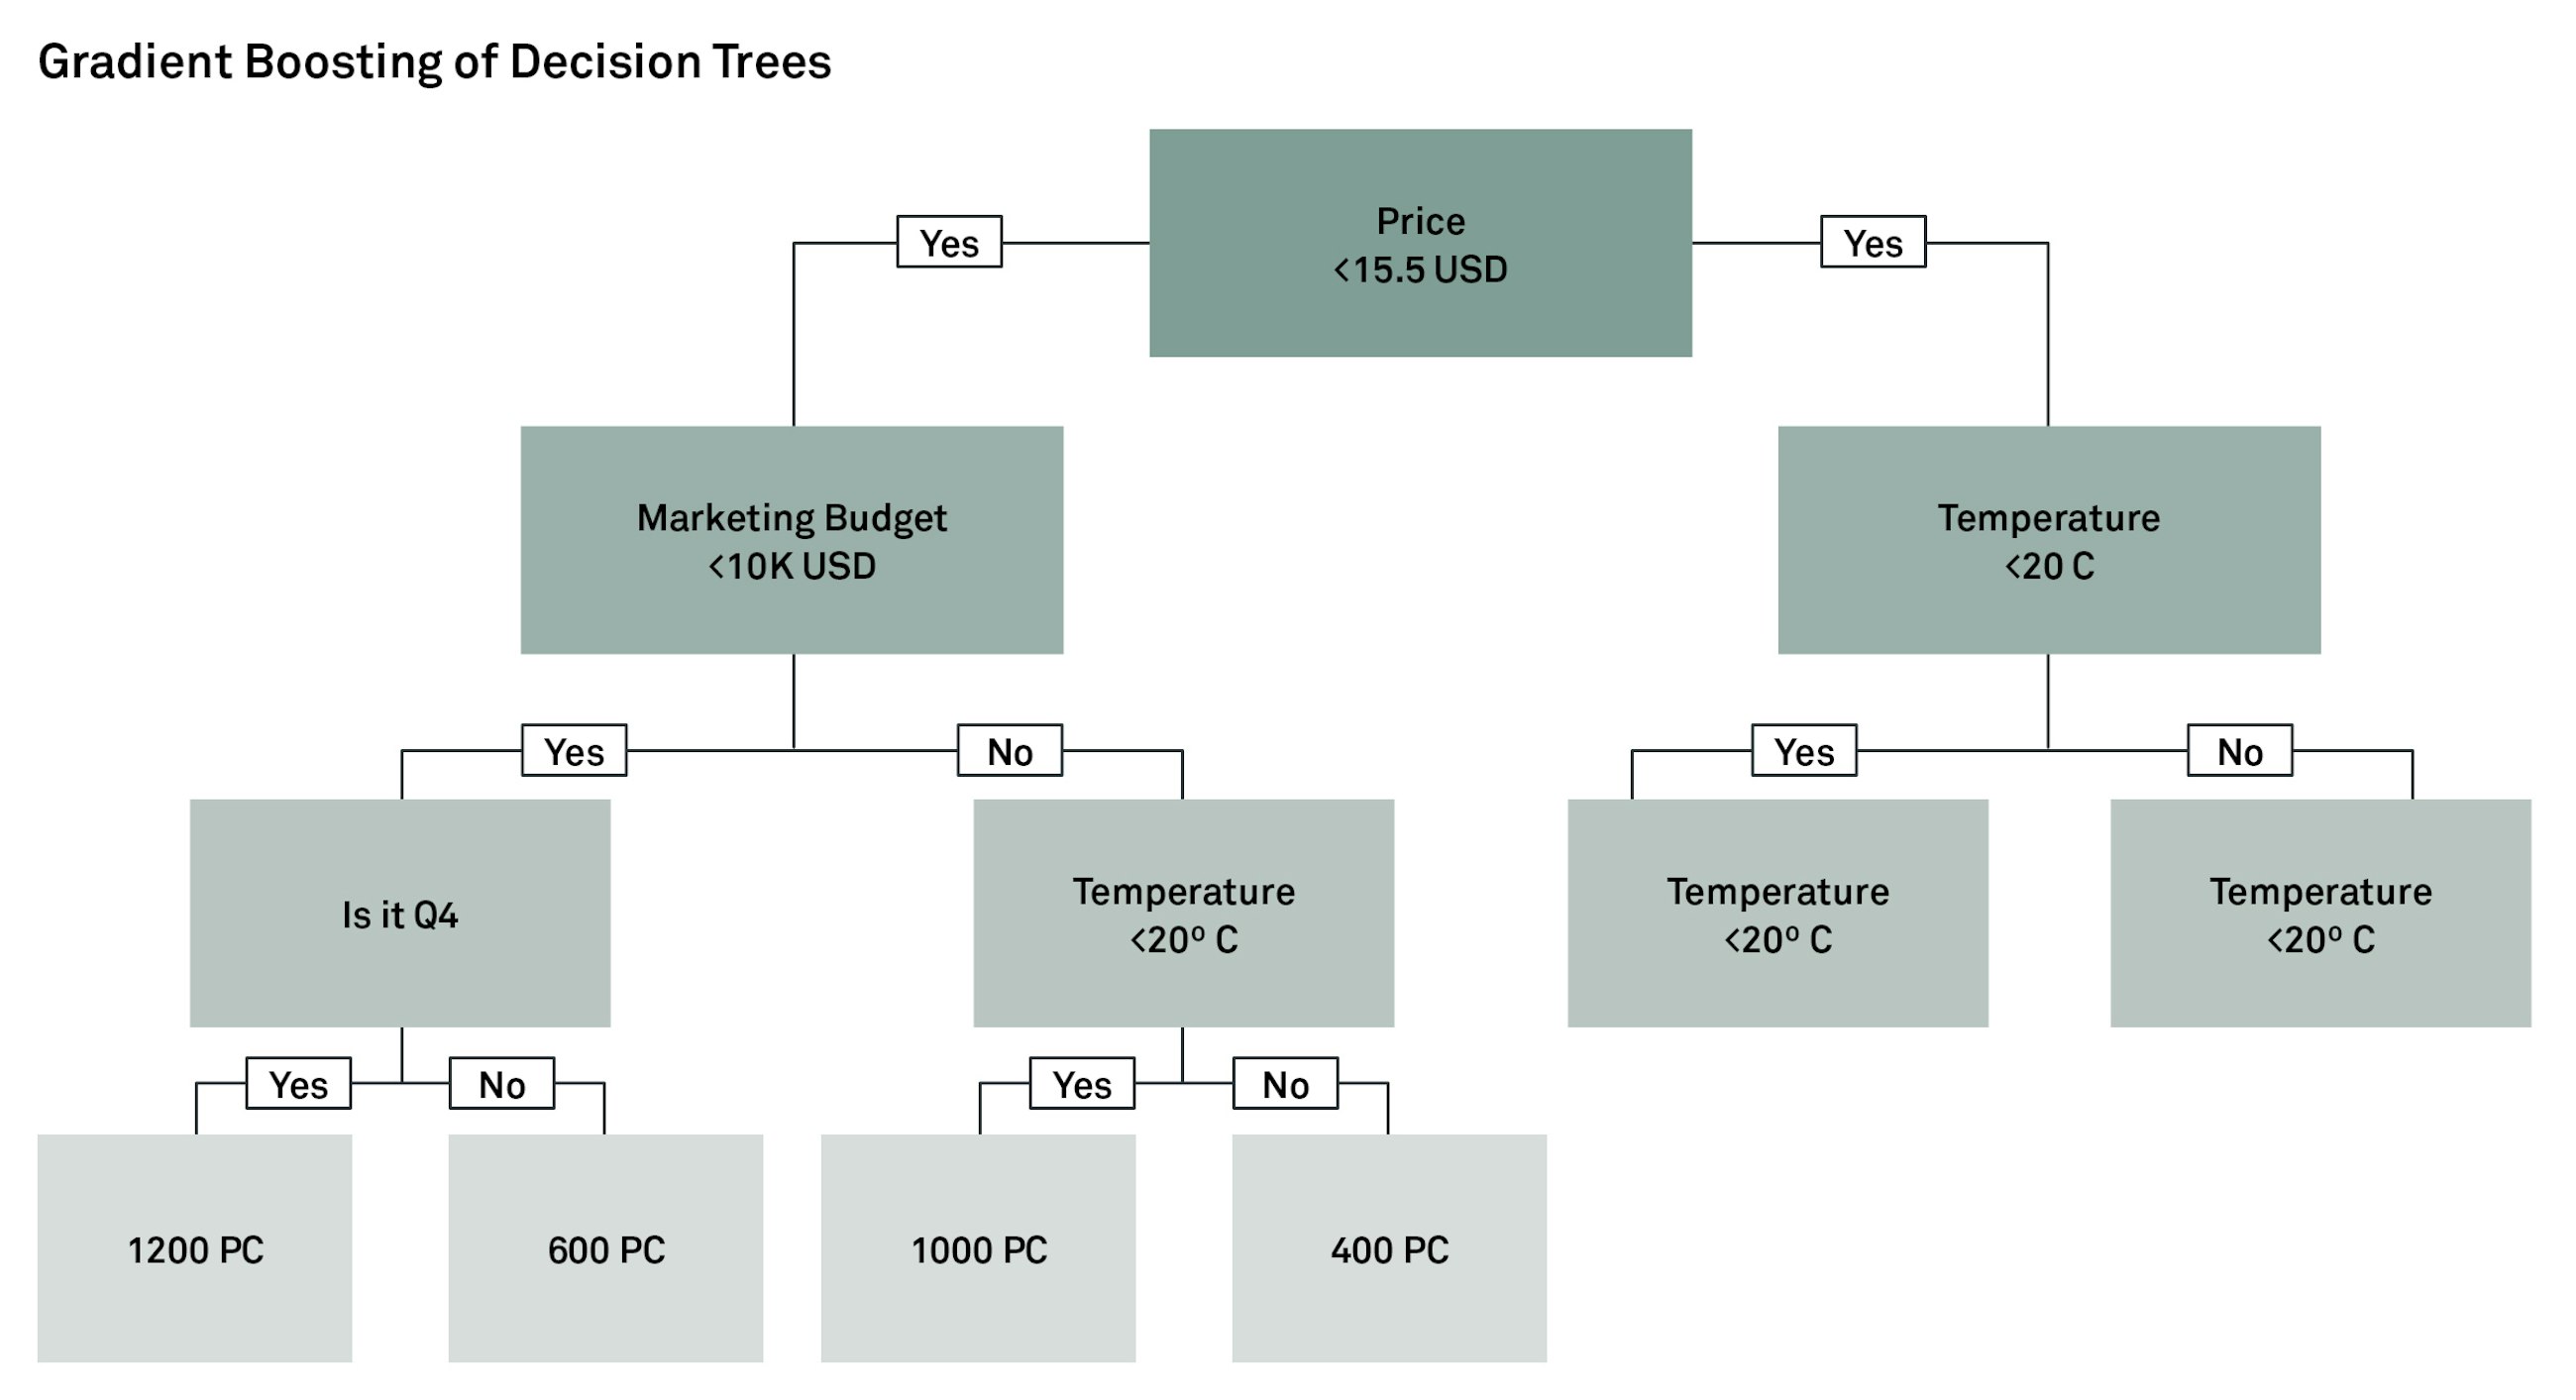 Gradient boosting of dicision trees